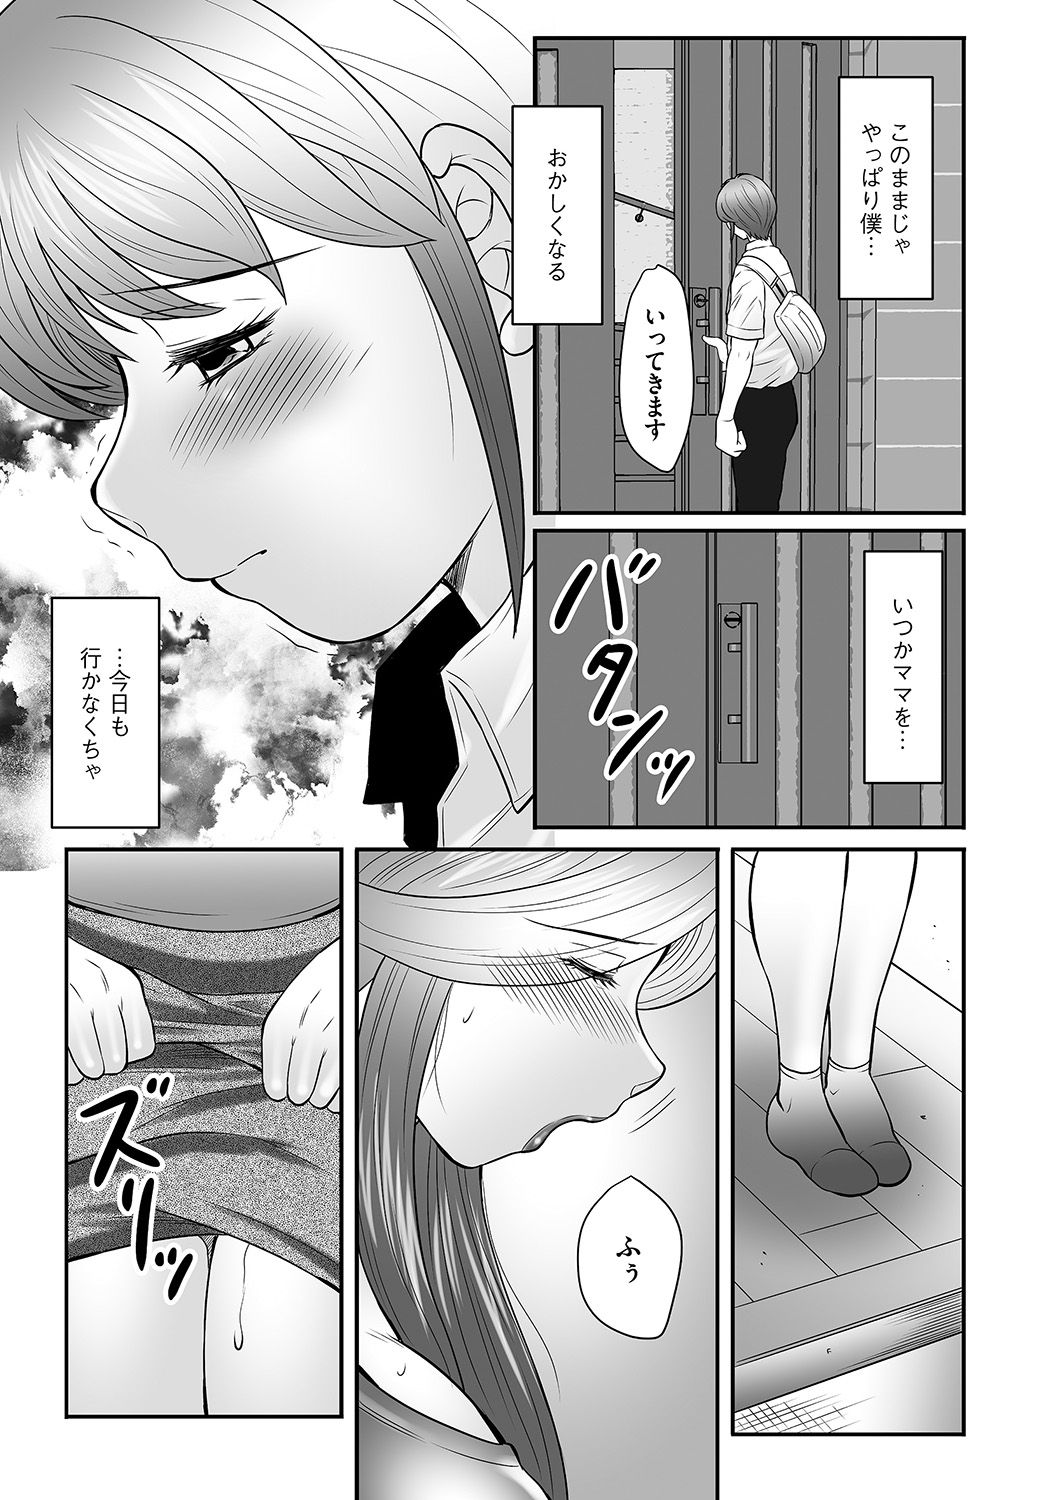 [Fuusen Club] Boshi no Susume - The advice of the mother and child Ch. 14 (Magazine Cyberia Vol. 73) [Digital] page 5 full